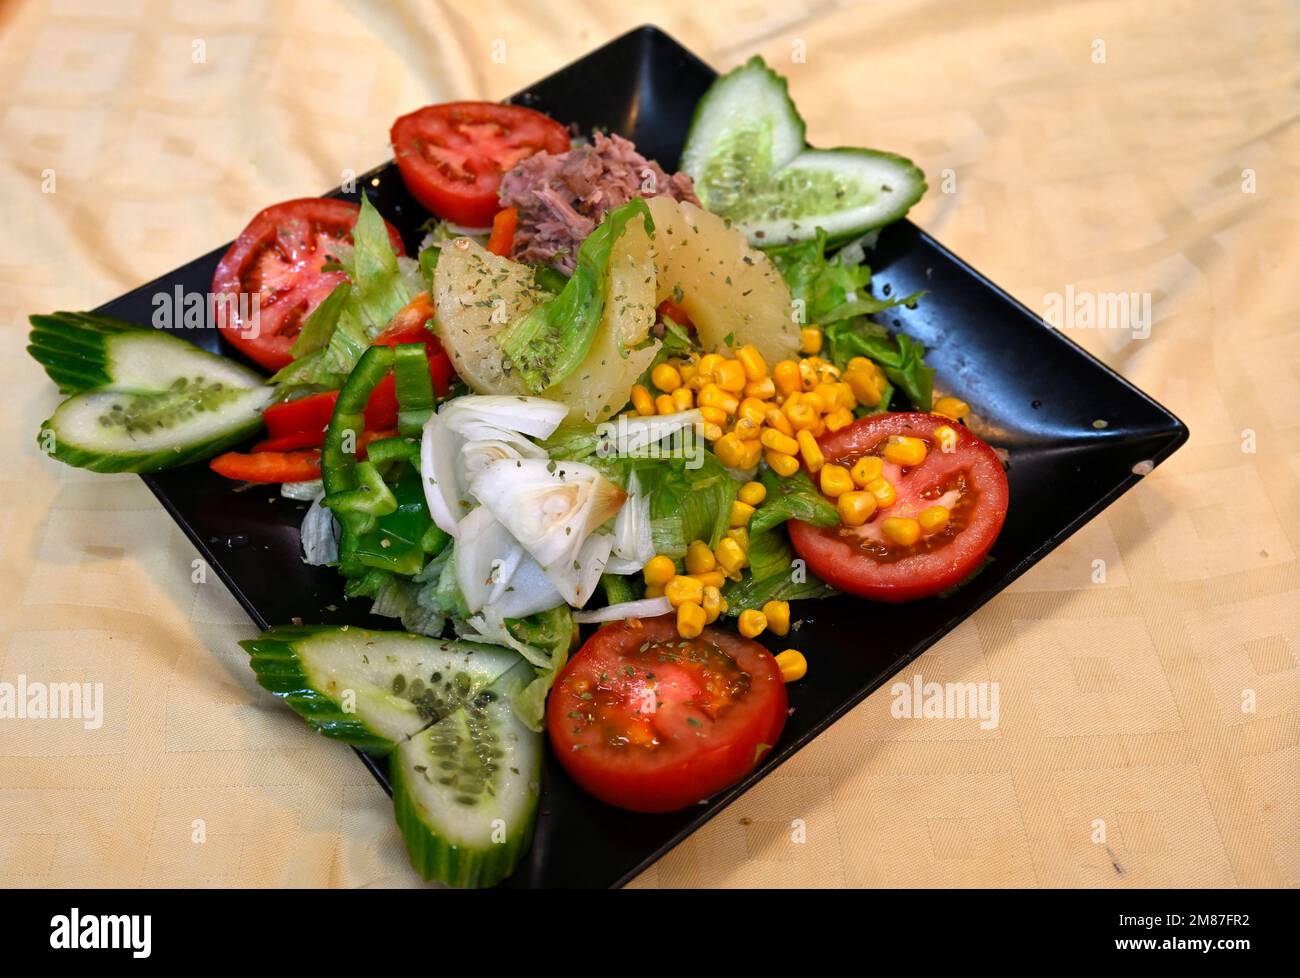 Plate of mixed salad, tomato, cucumber, onion, green pepper, corn, pineapple with oregano on black square plate Stock Photo